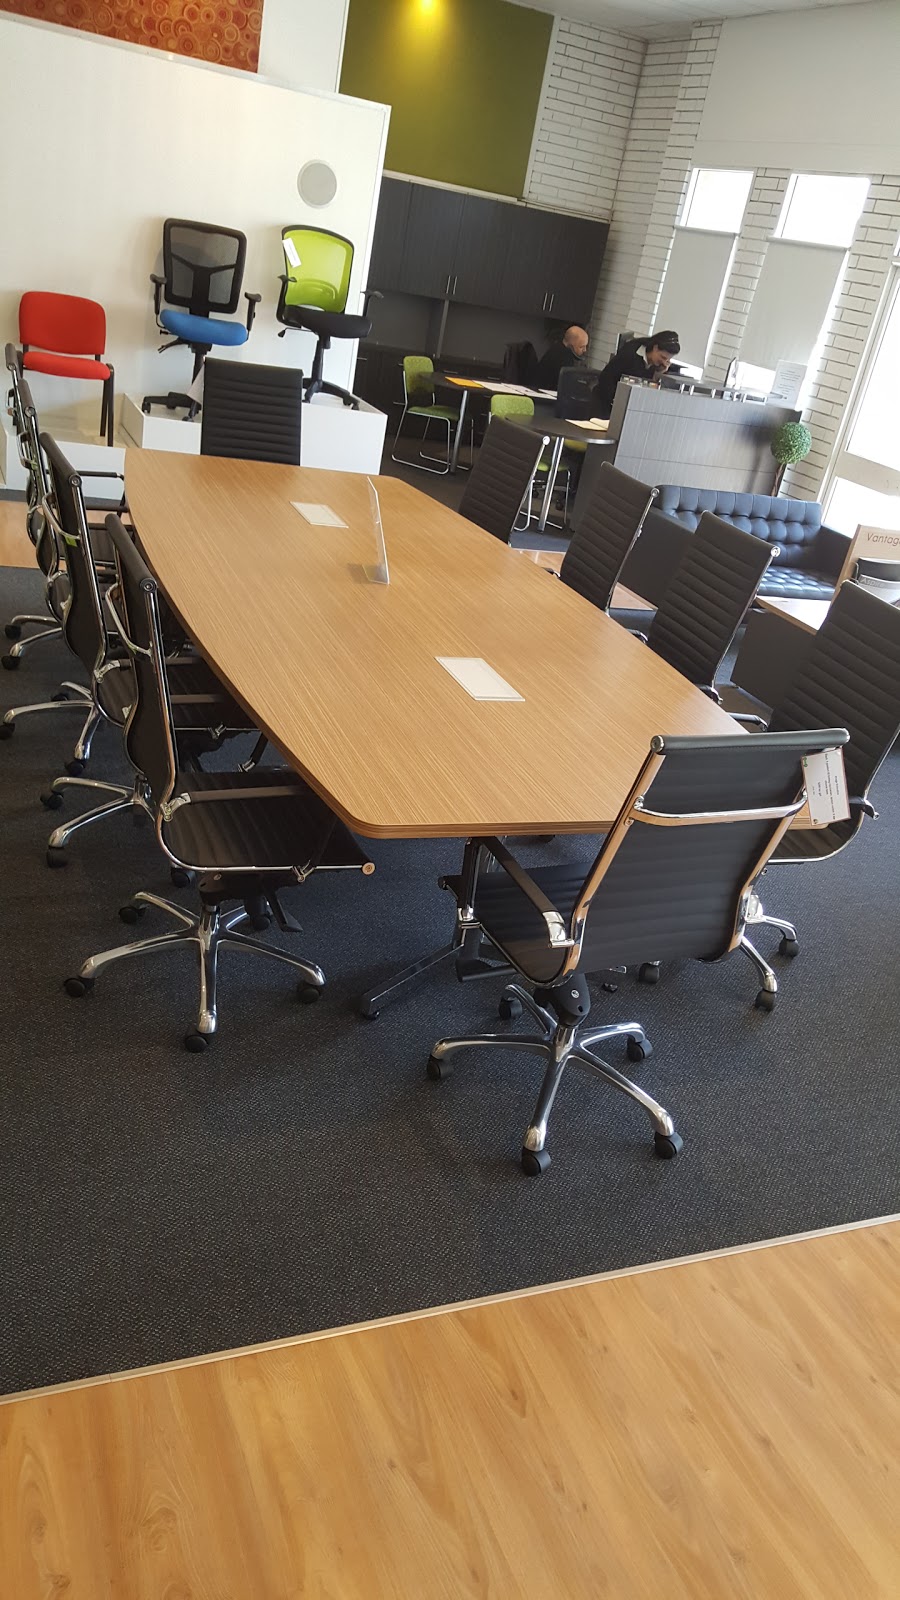 Prodigy Office Furniture | furniture store | 44 Greens Rd, Dandenong VIC 3175, Australia | 0397931222 OR +61 3 9793 1222